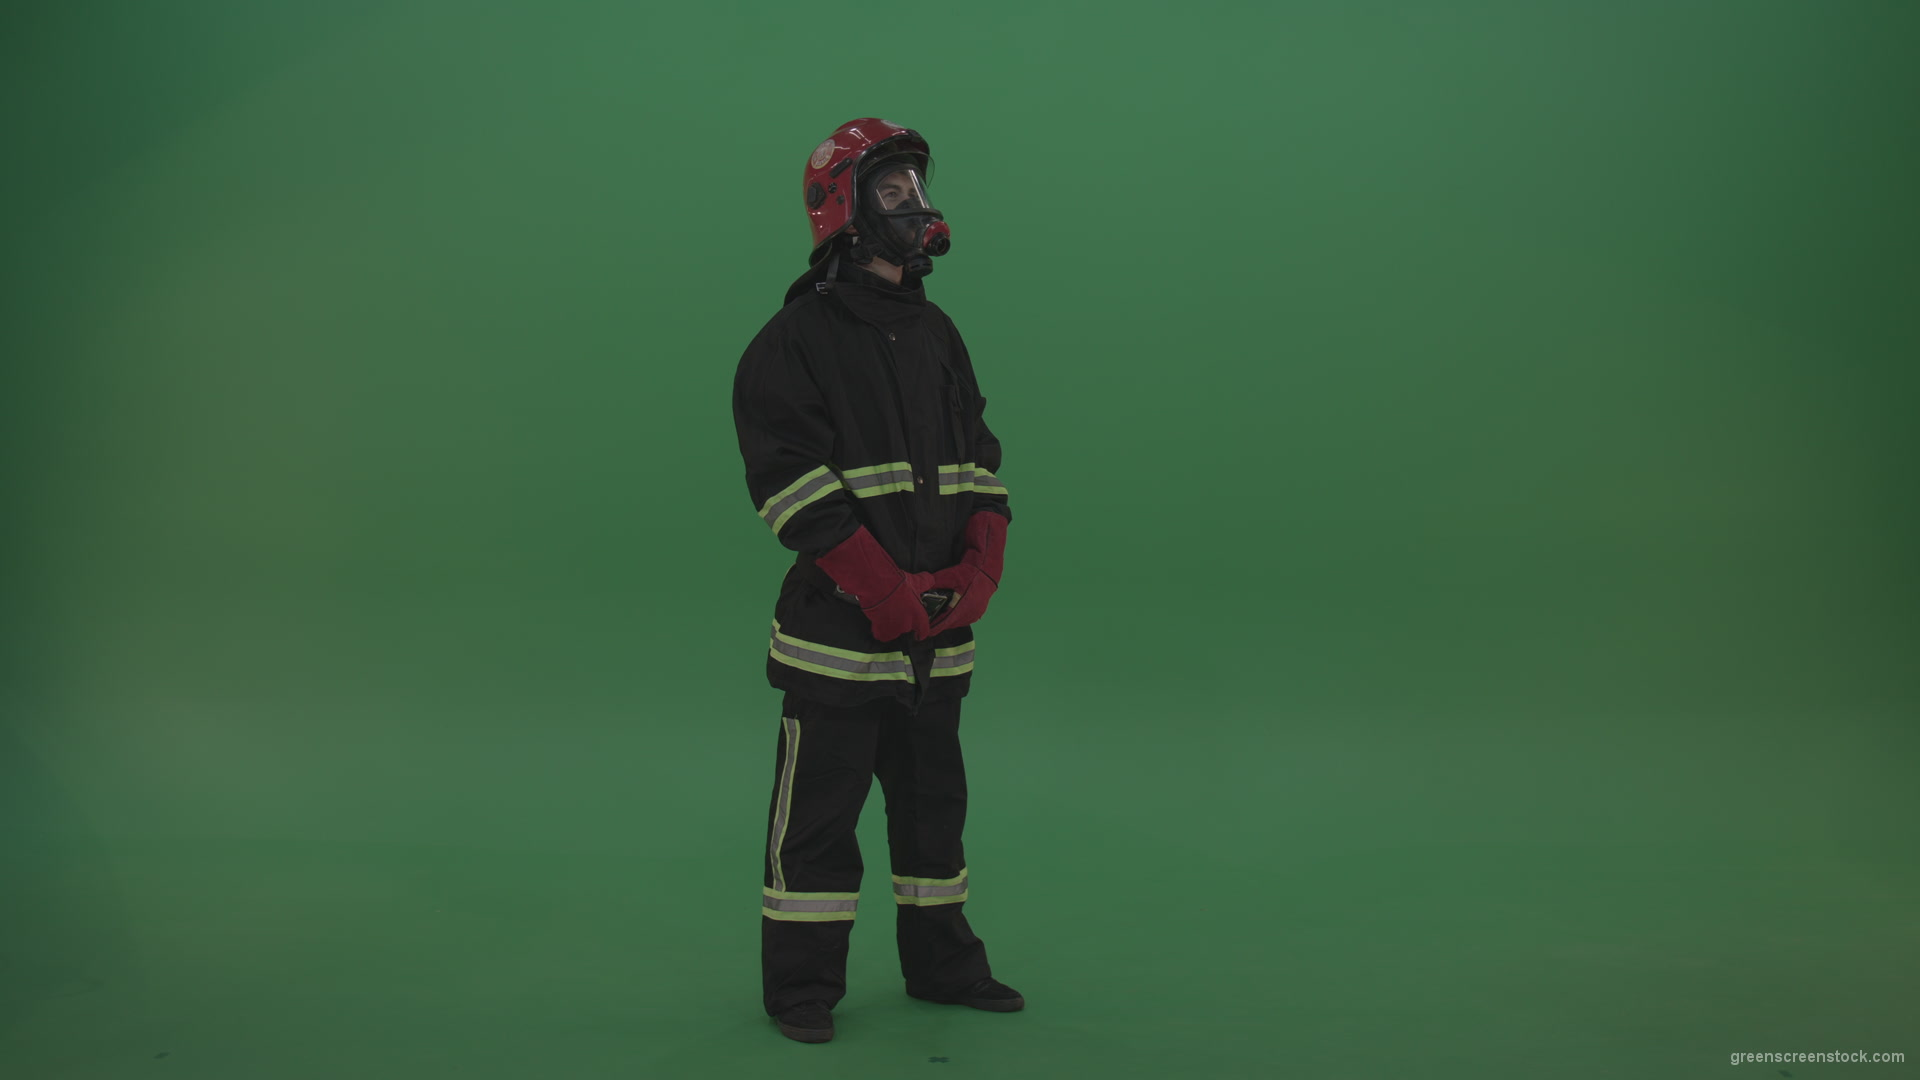 Young_Firefighter_Wearing_Full_FIreman_Working_Kit_Looking_Around_To_Fing_Some_Fire_Arson_Problems_On_Green_Screen_Wall_Background_008 Green Screen Stock